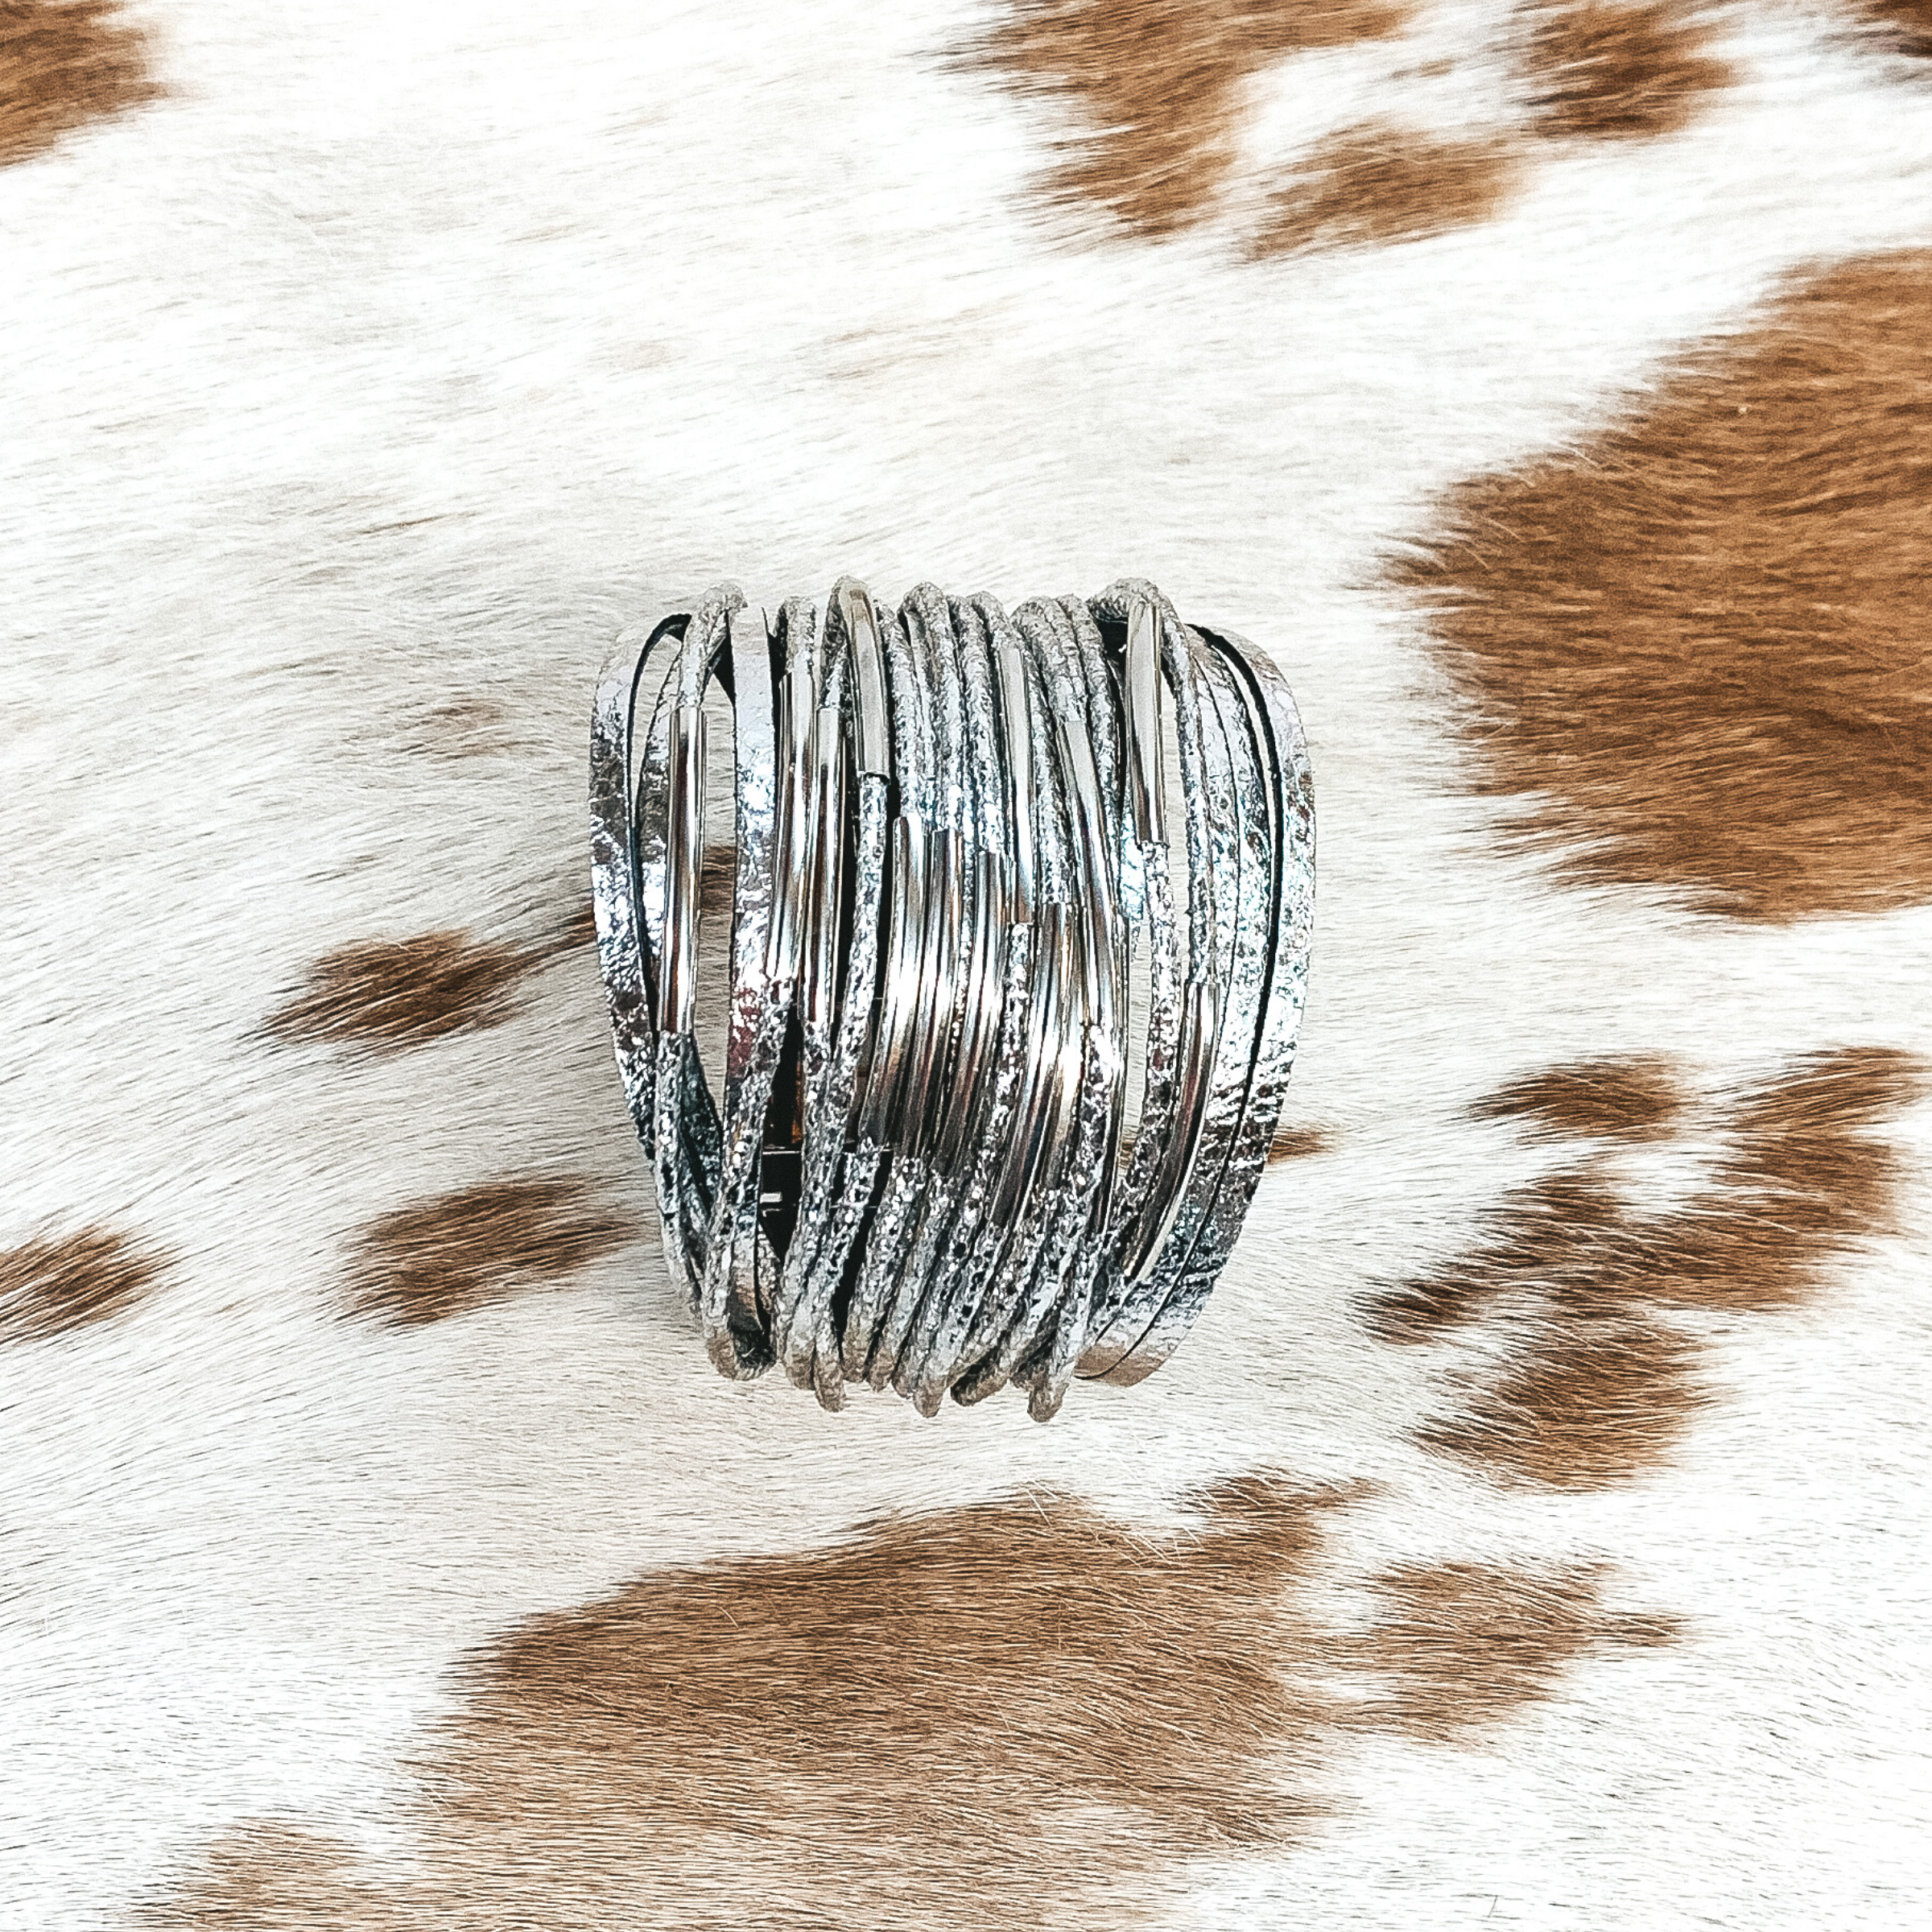 This bracelet has a lot of silver destressed strands with some of them having silver bar pendants. This bracelet is pictured on a white and brown cow print background.